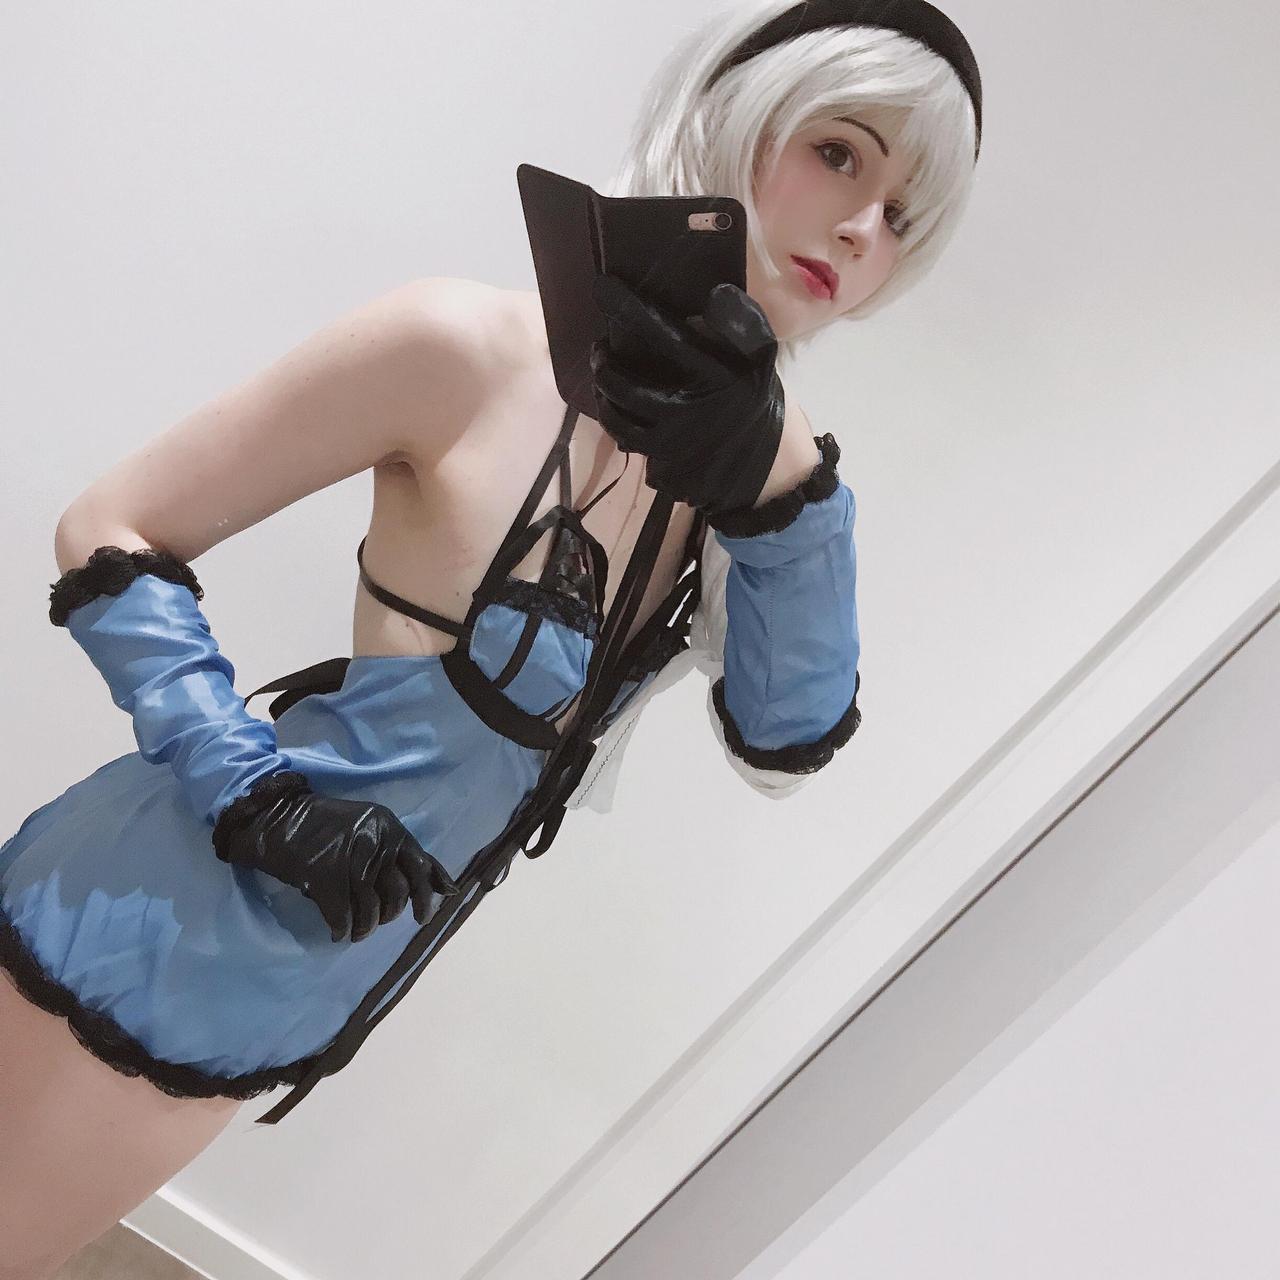 Self Dlc 2b Costest From Nier Automata By Violaafo